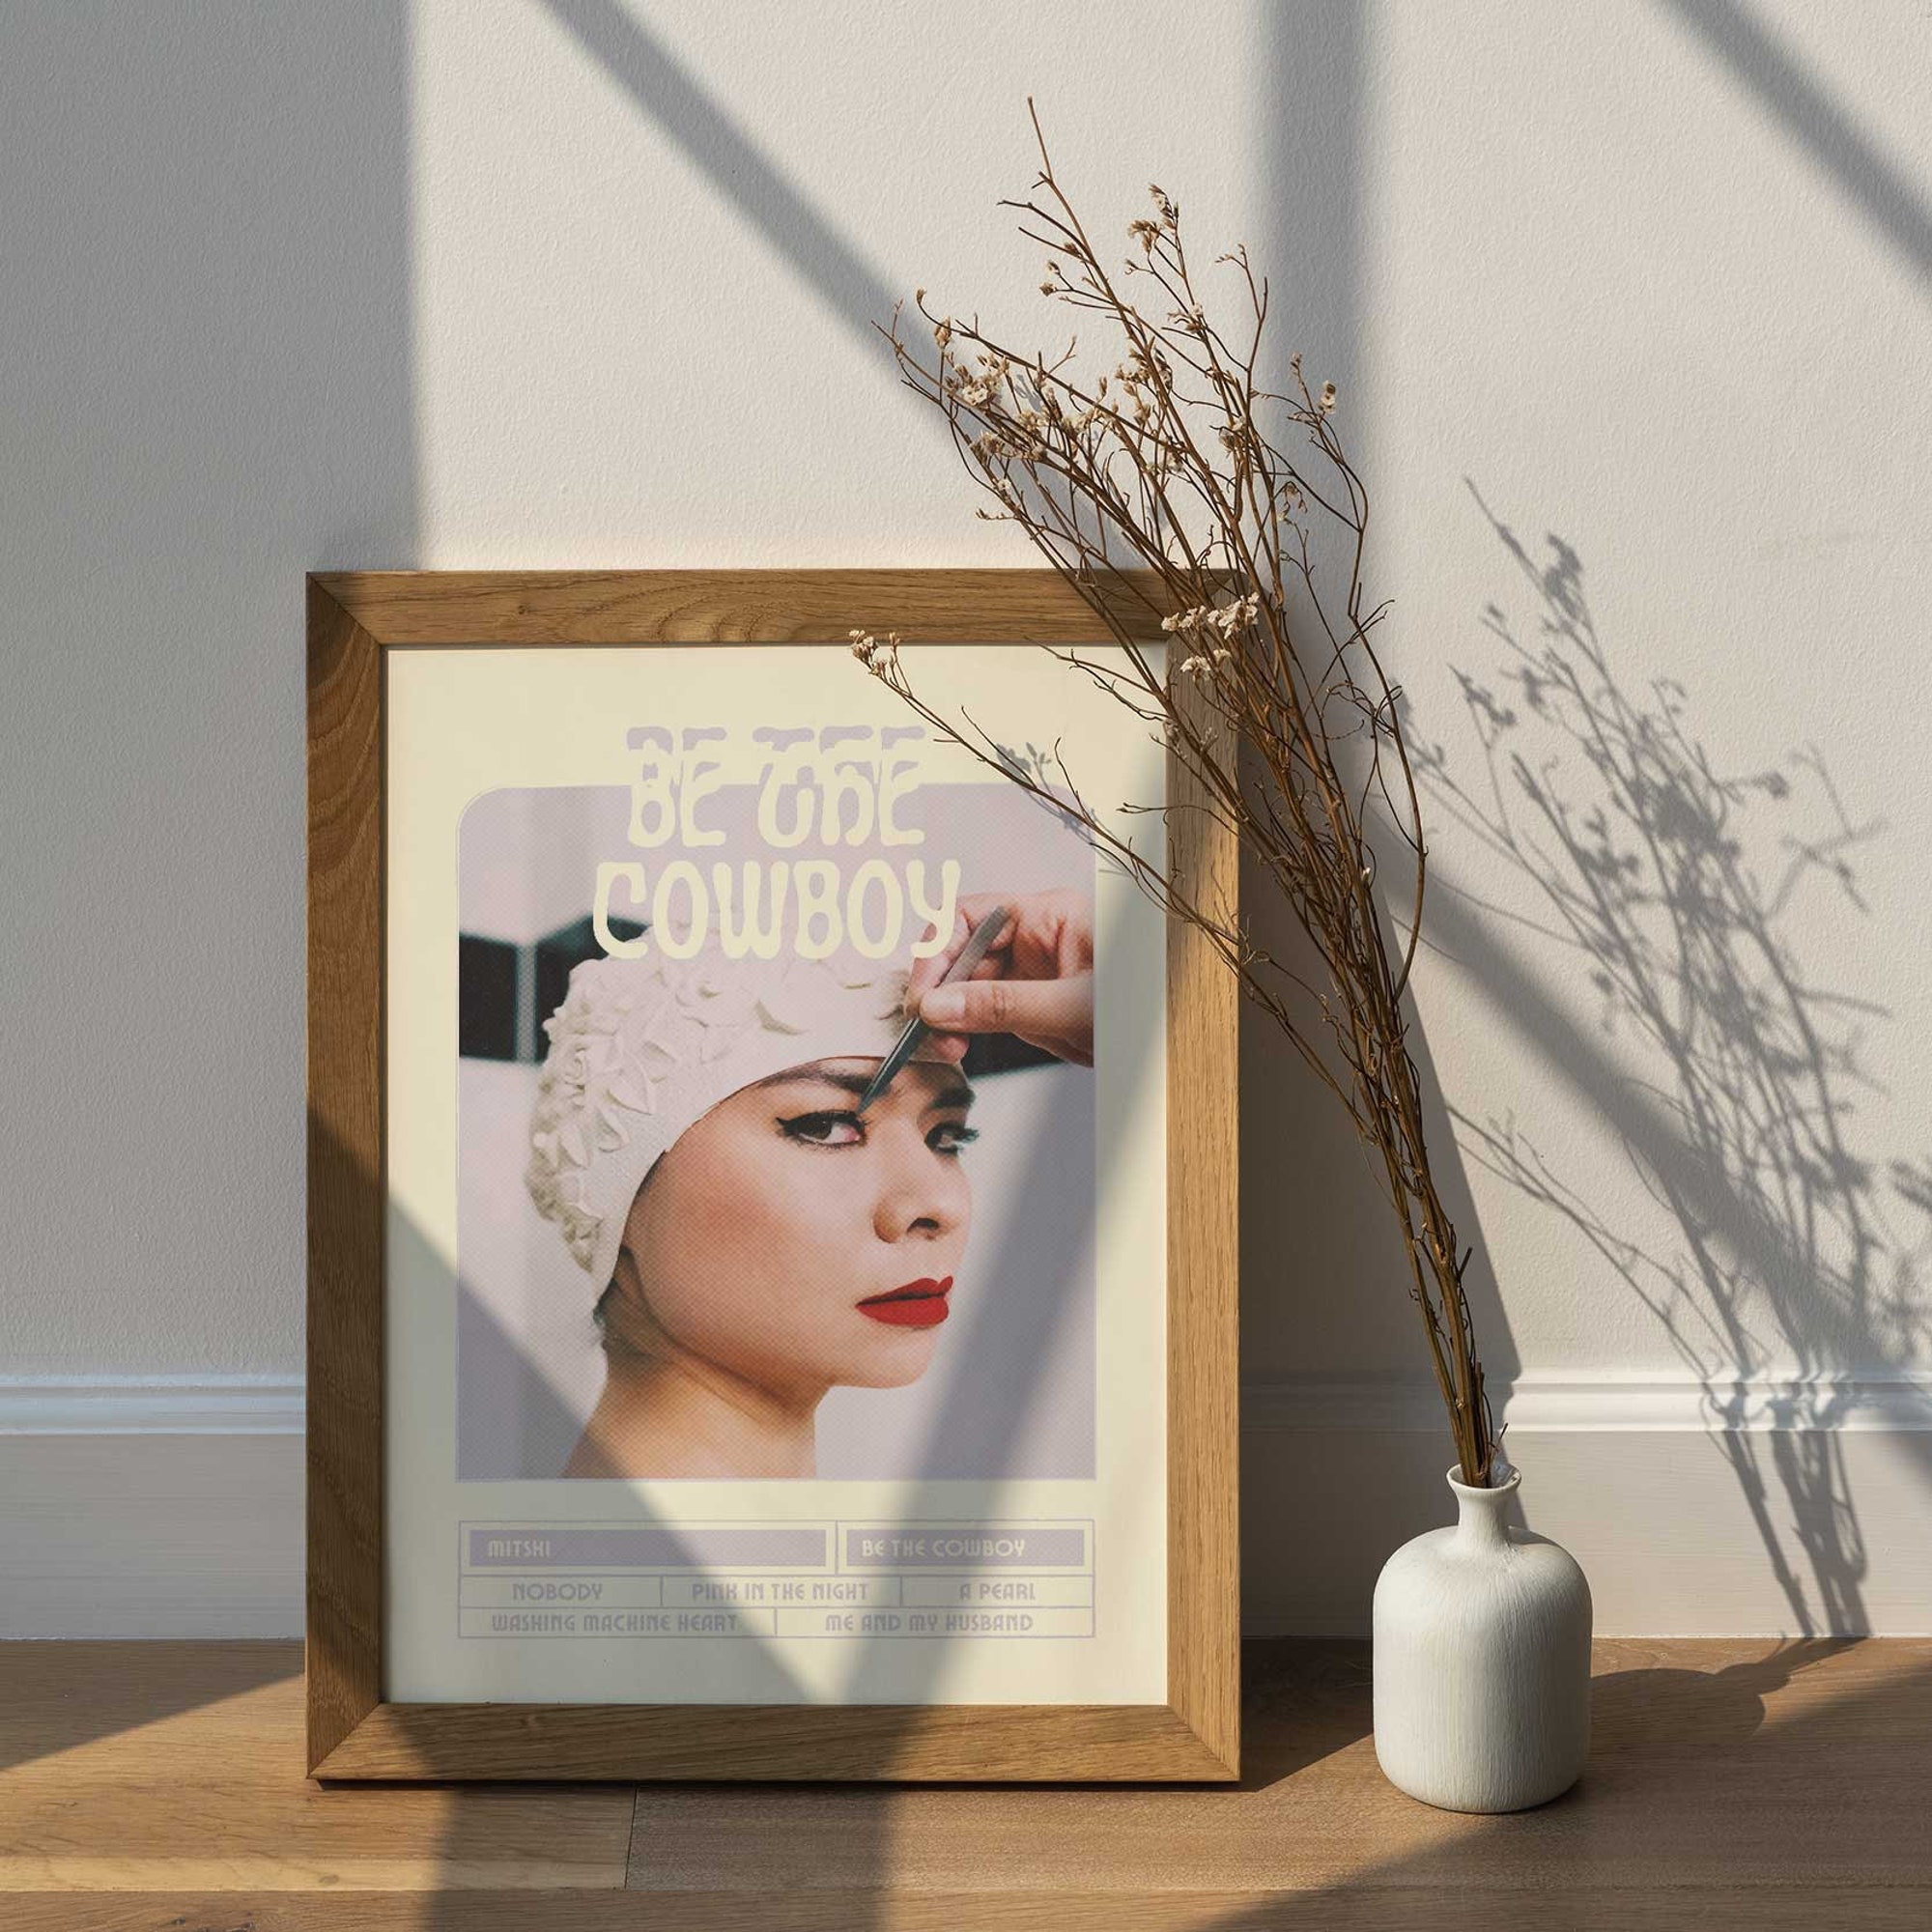 Discover Be the Cowboy / Mitski / Music Inspired Album Vintage Poster Print / Music Poster / Wall Decor / Home Decor / 18x24in